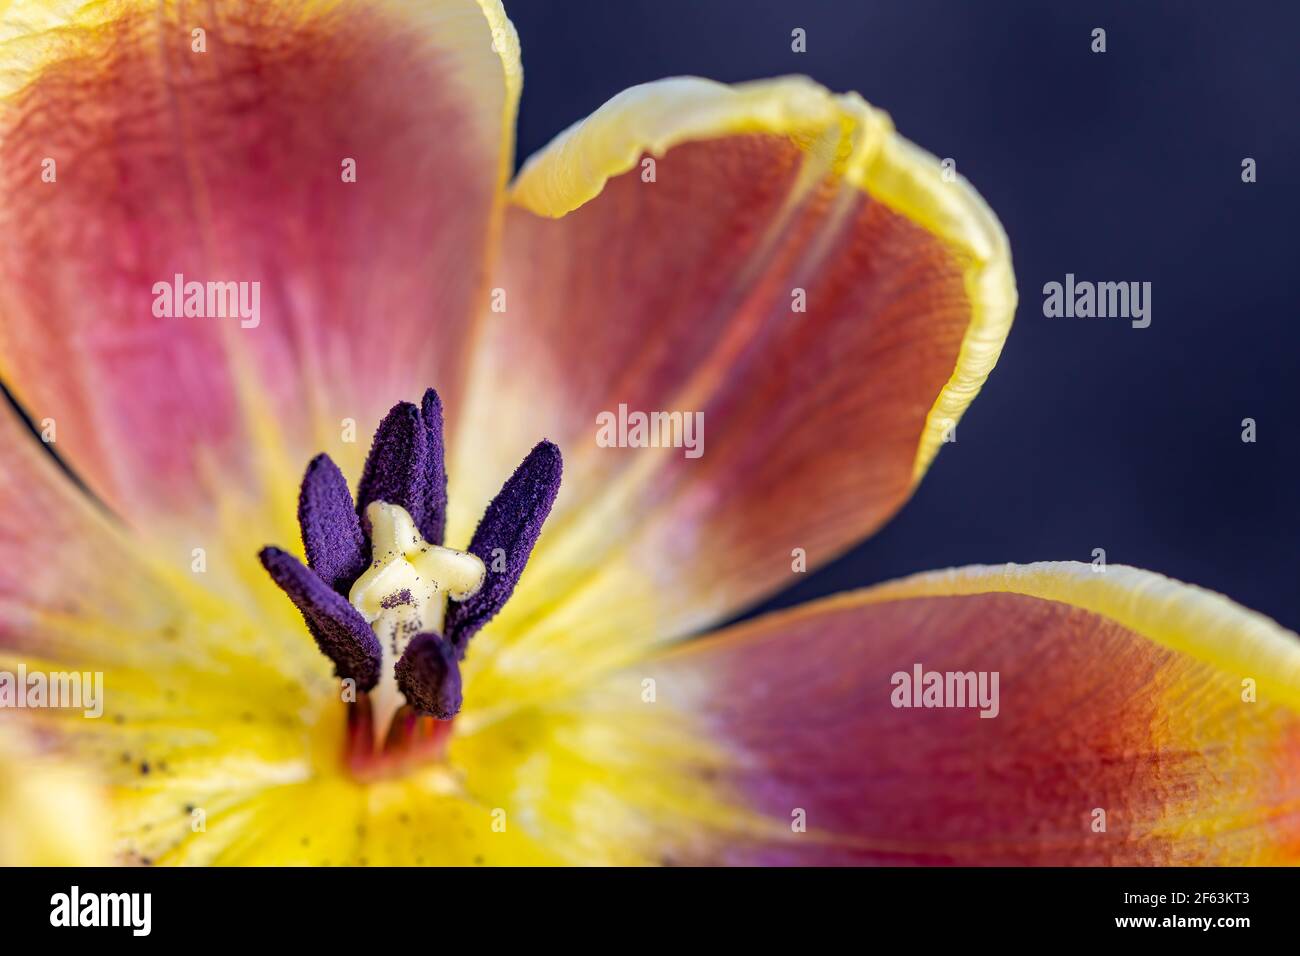 Macro photography Pink and yellow open tulip showing, stigma, pistils, anther, pollen. Stock Photo